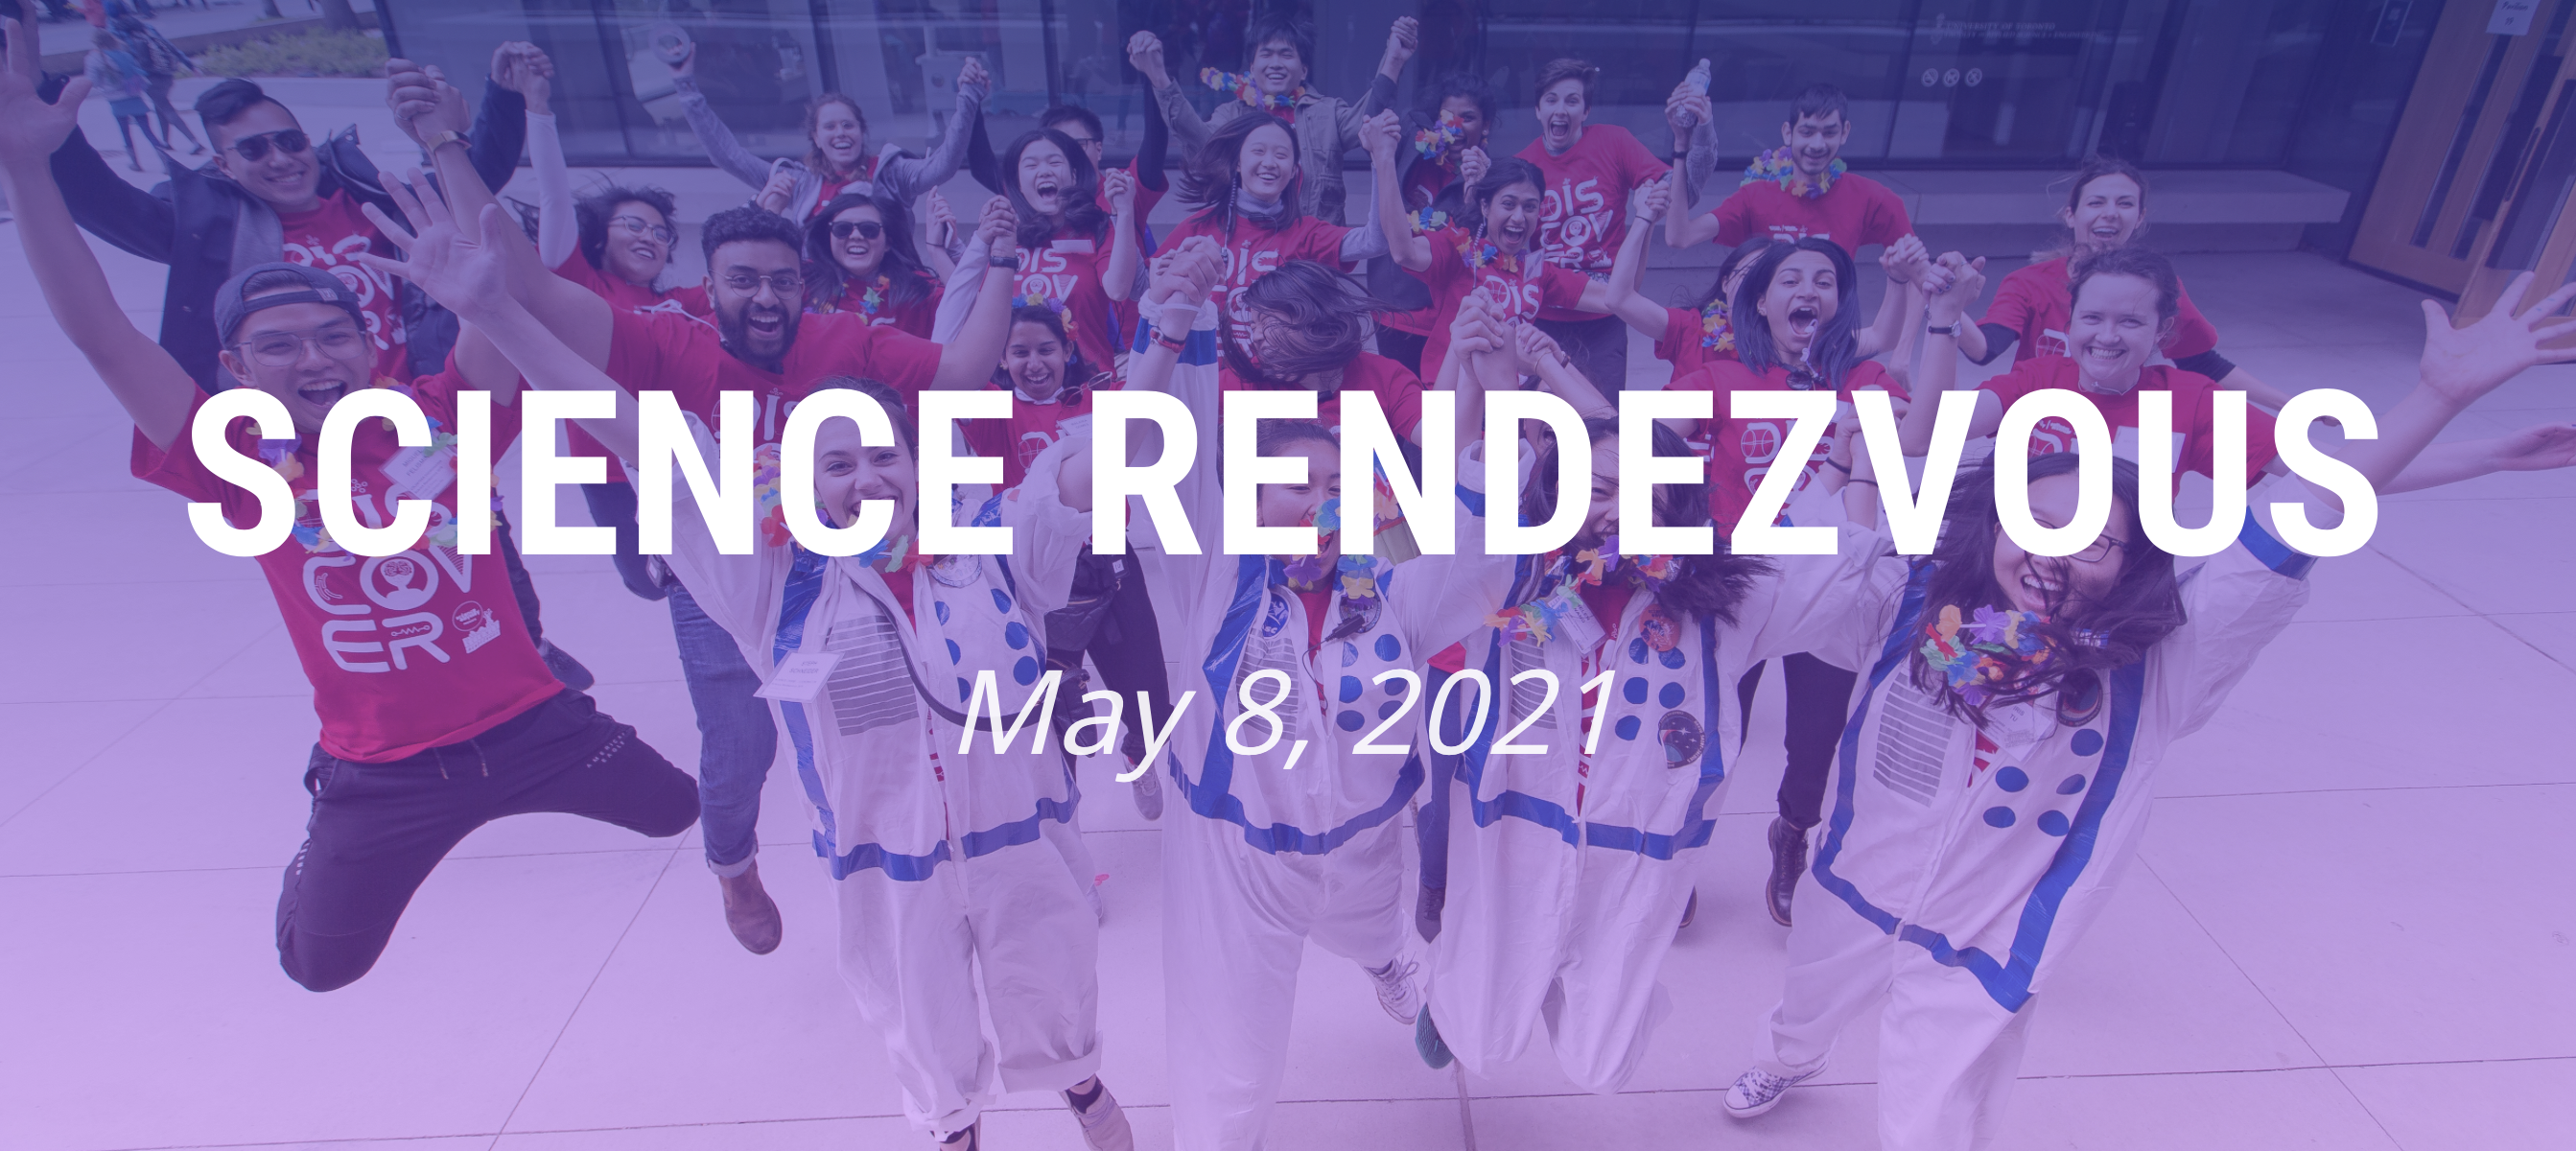 Science Rendezvous May 8, 2021